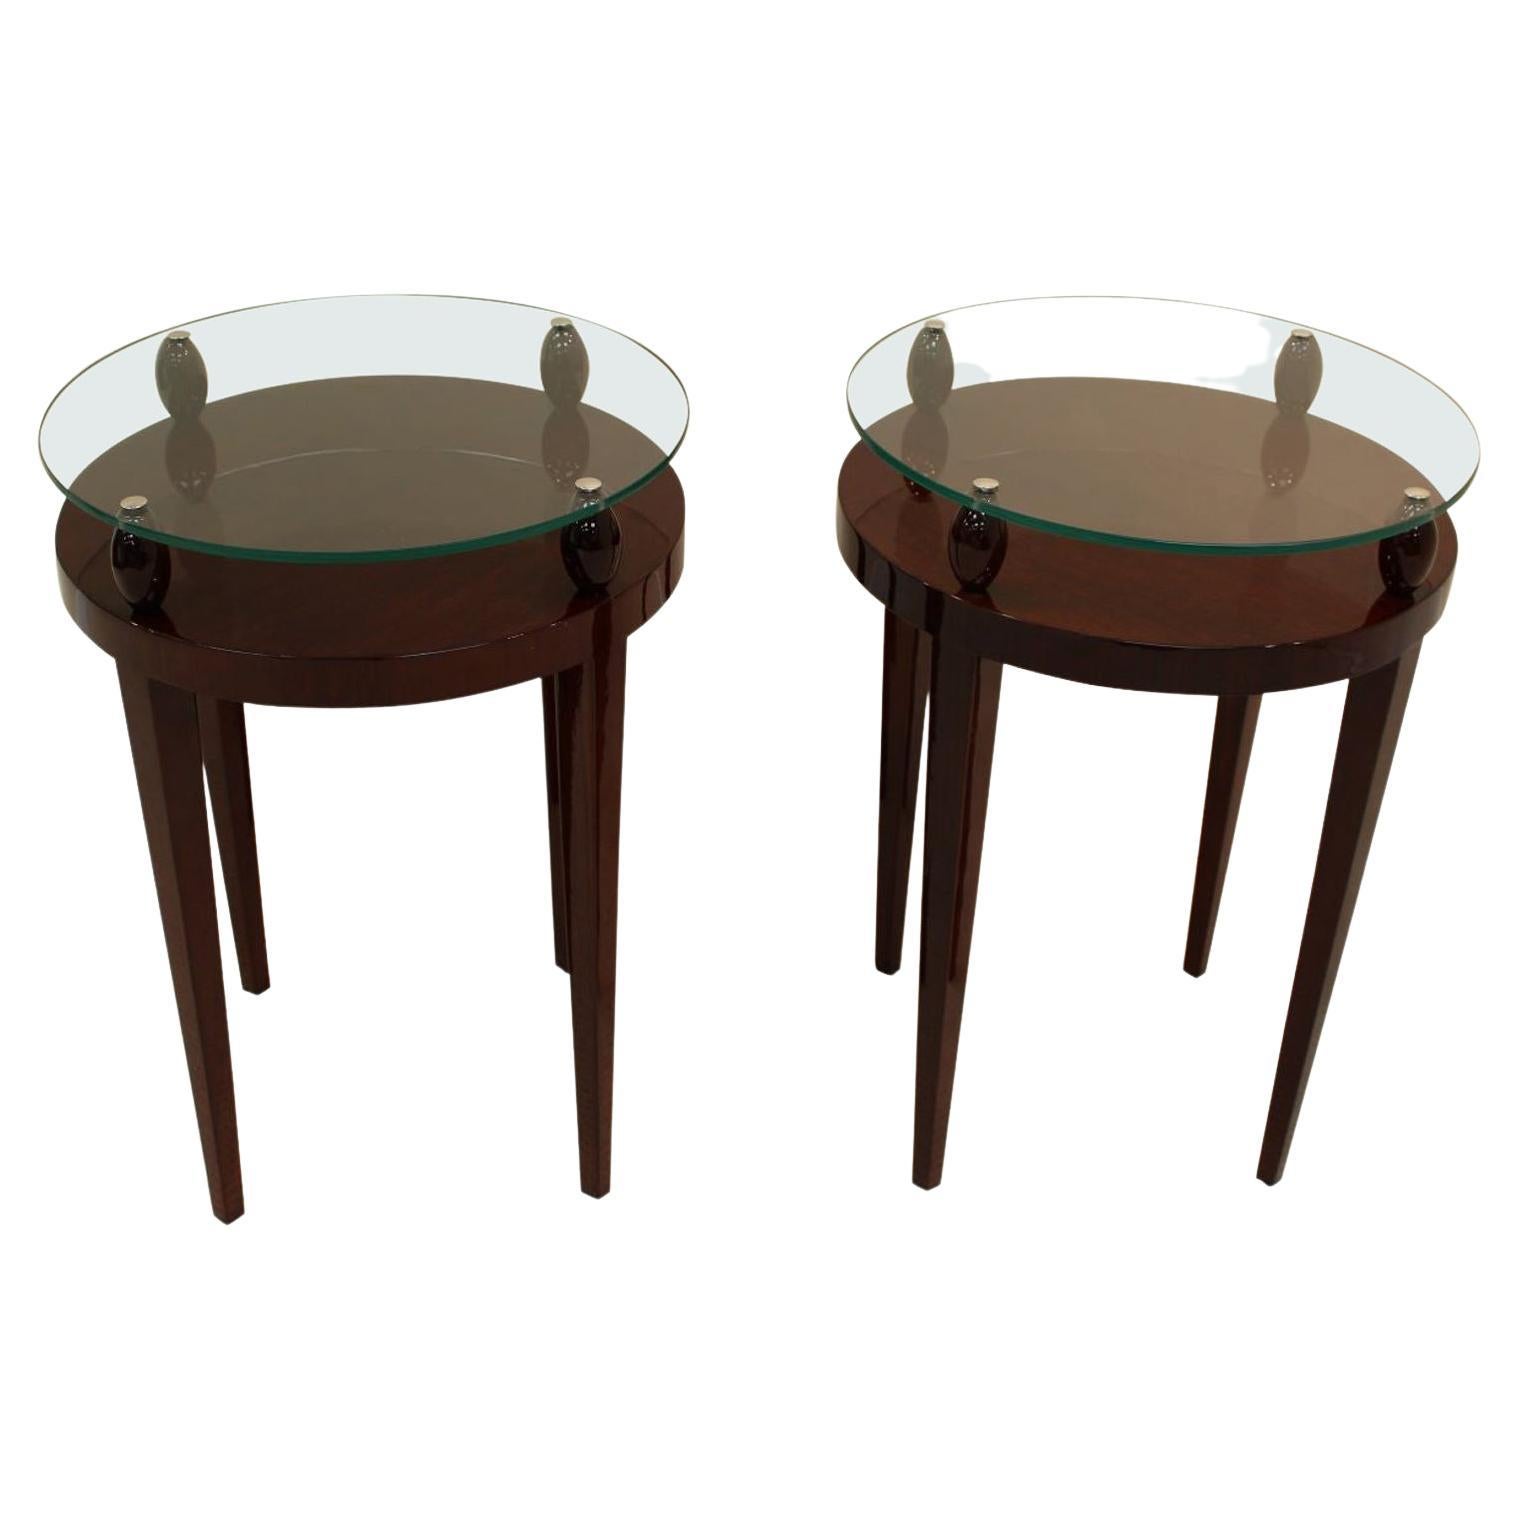 Stunning Pair of Round  Art Deco Glass-Top Side Tables In Walnut Circa 1940's For Sale